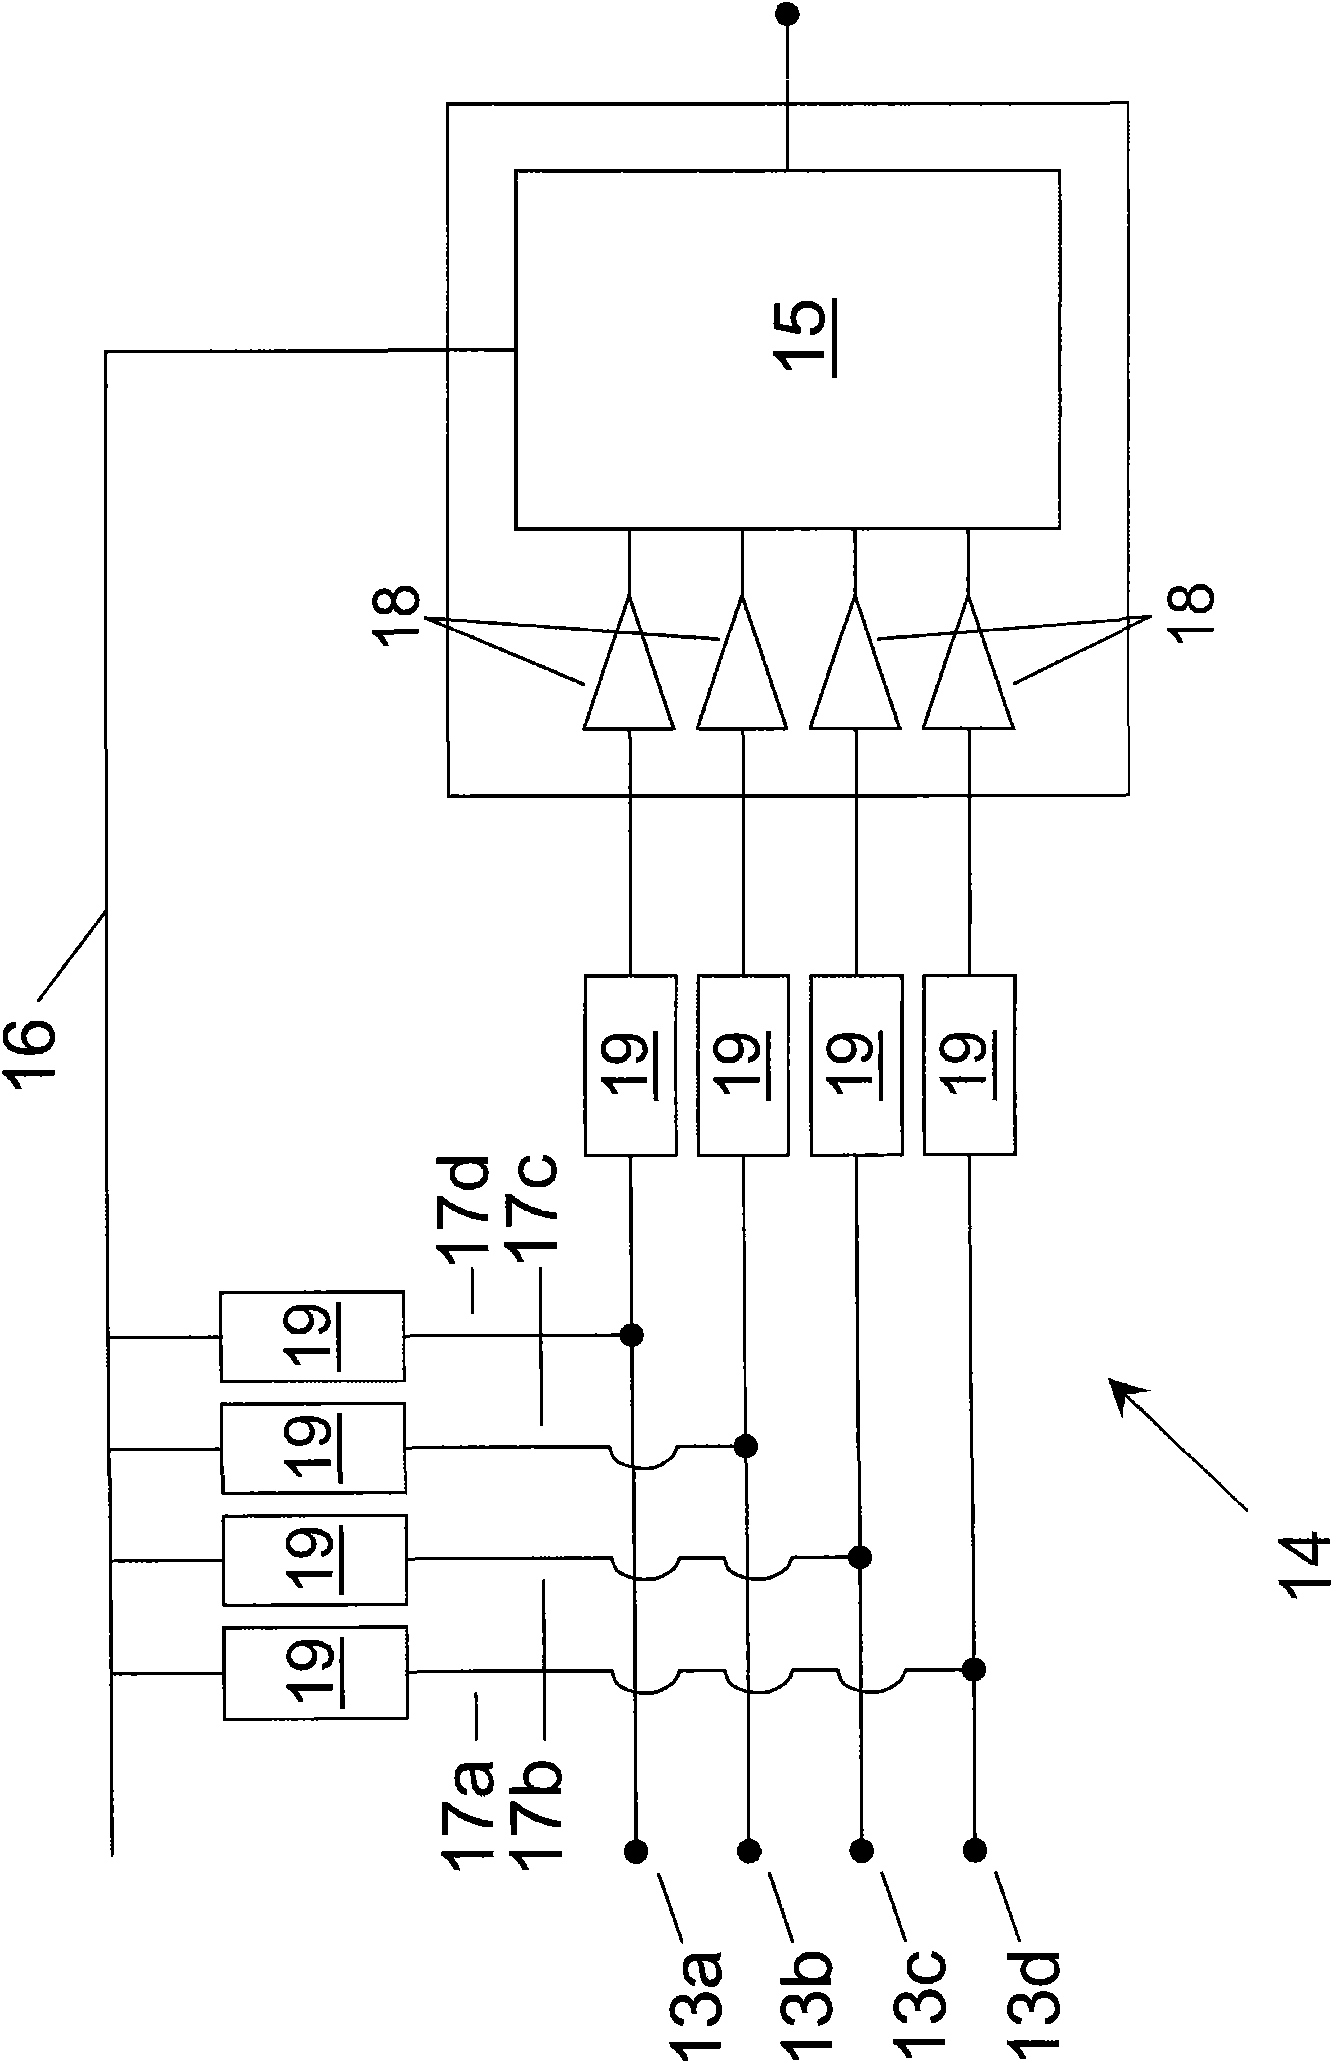 Apparatus for detecting the presence of skin